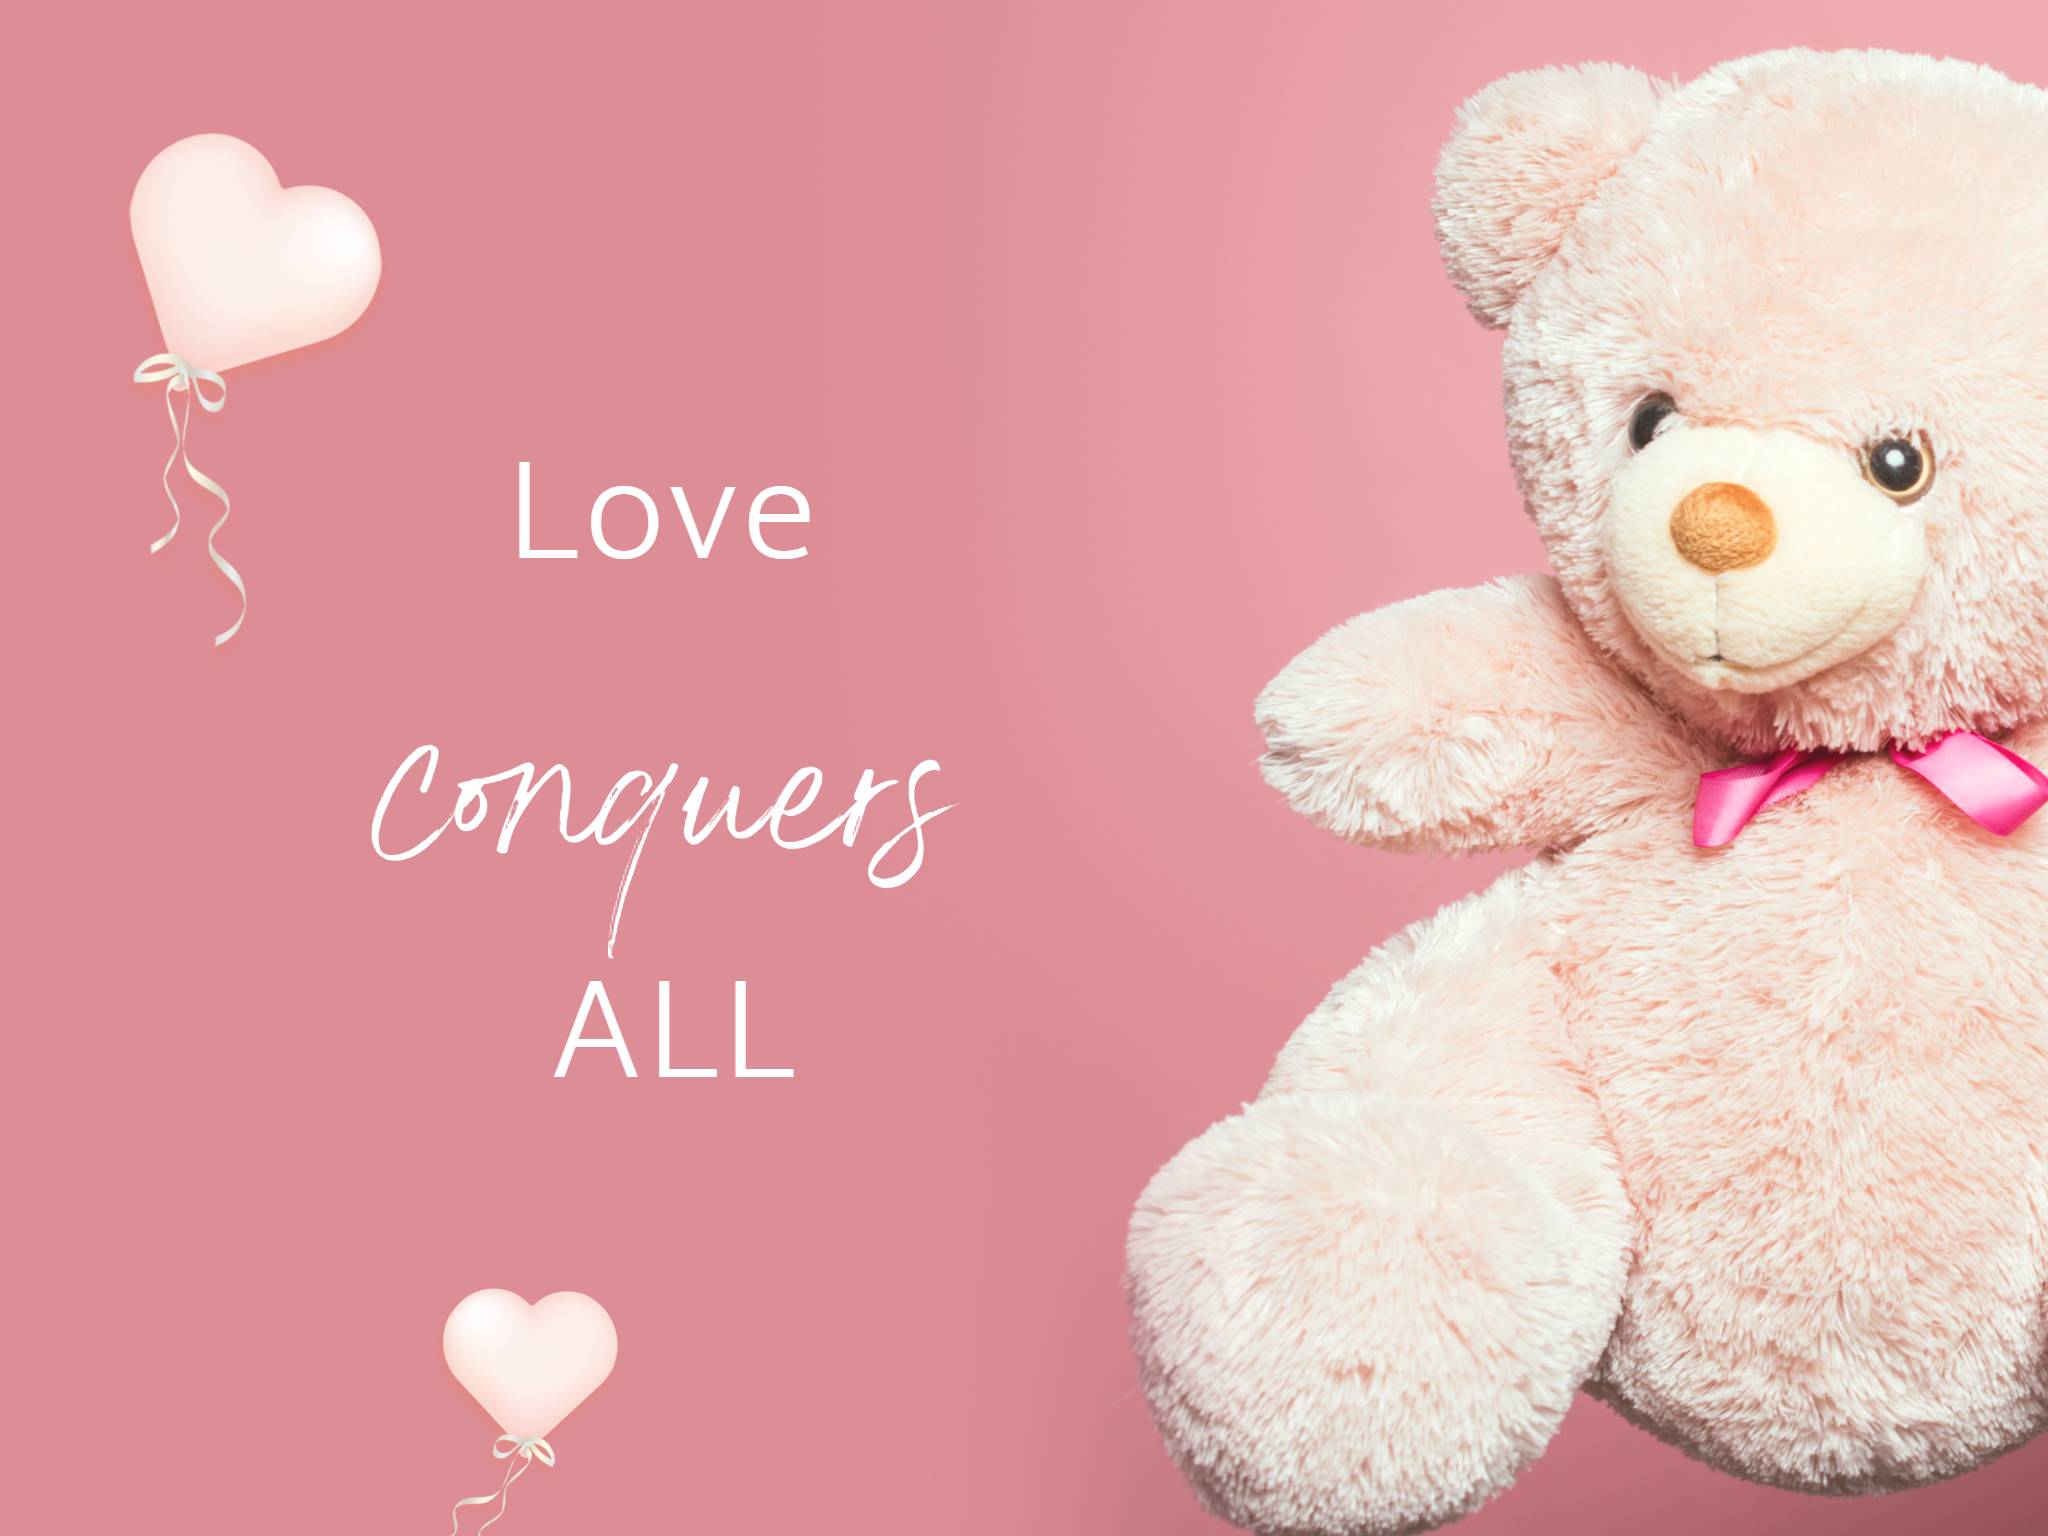 short cute love quotes pink background with a bear picture